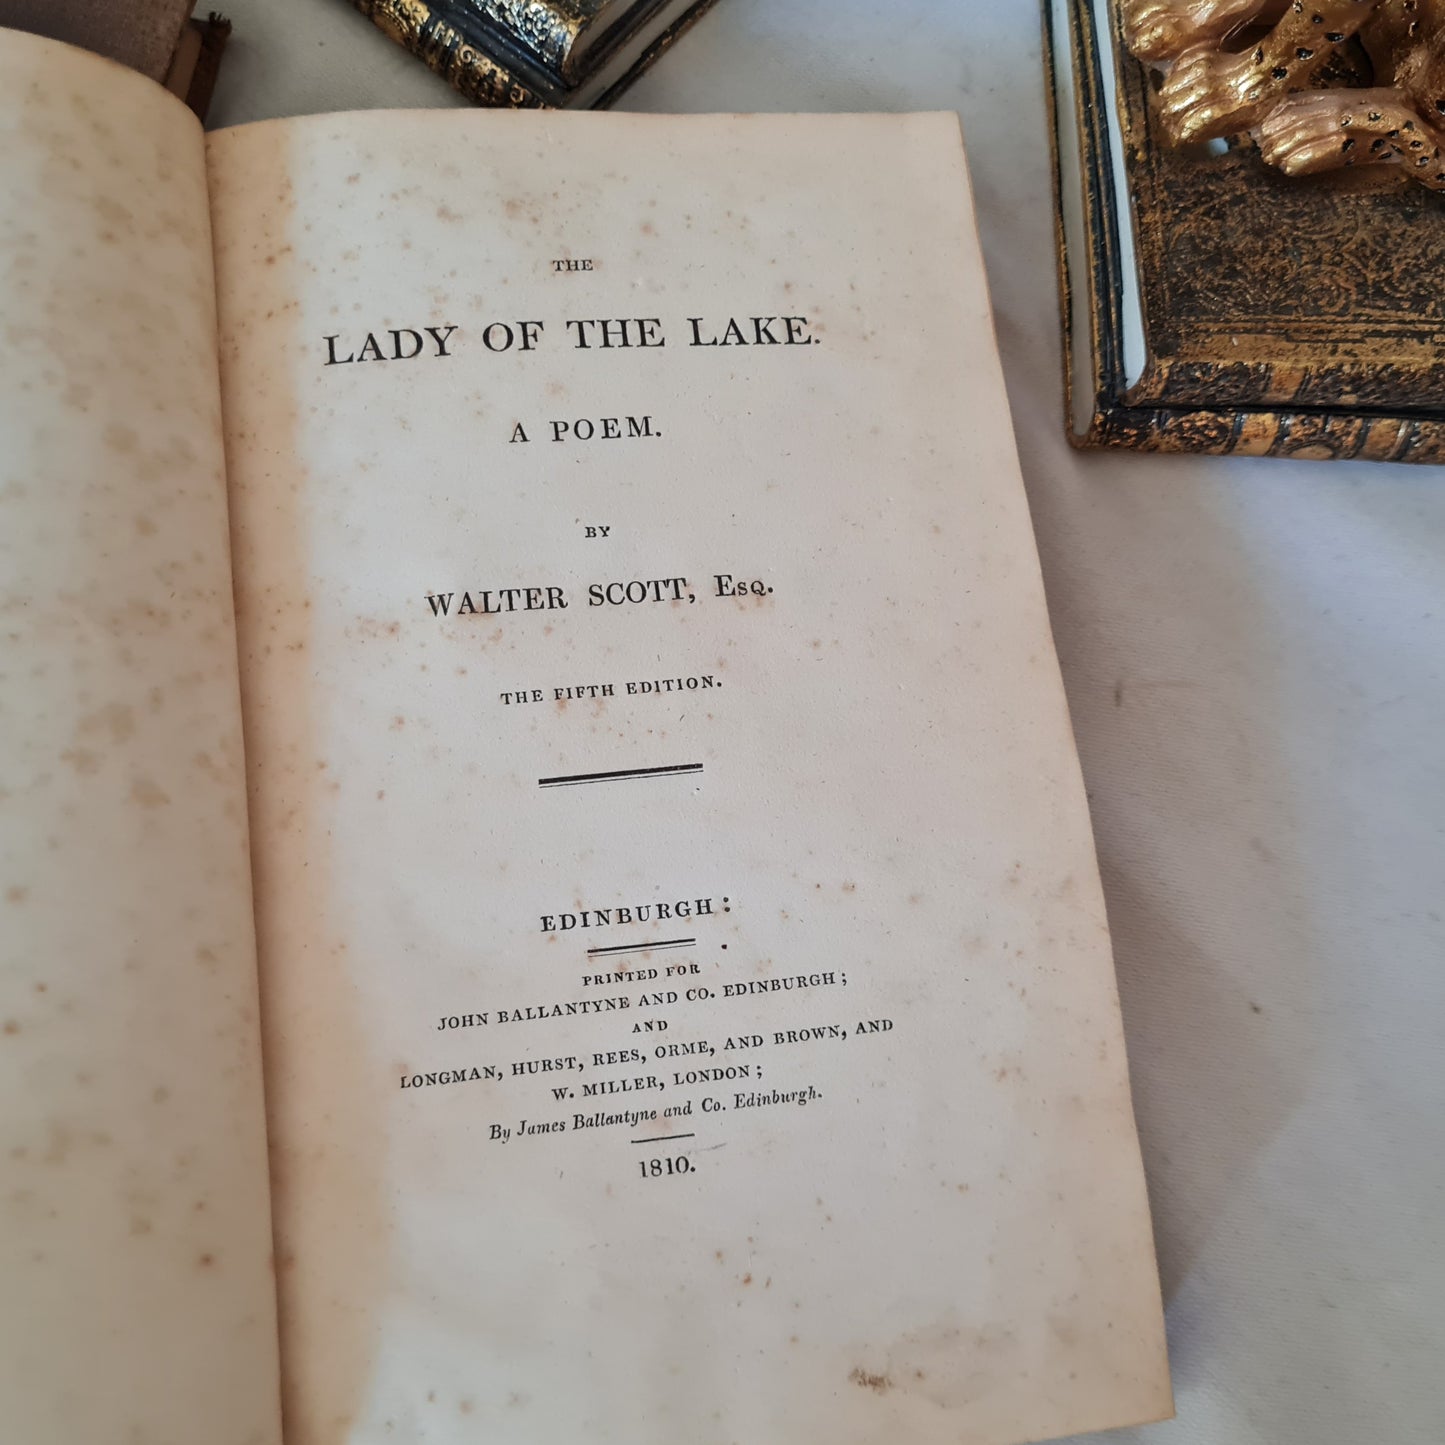 1810 and 1815 From the Years of First Publication / Two Extremely Early Copies of Sir Walter Scott's Lady of the Lake and Lord of the Isles